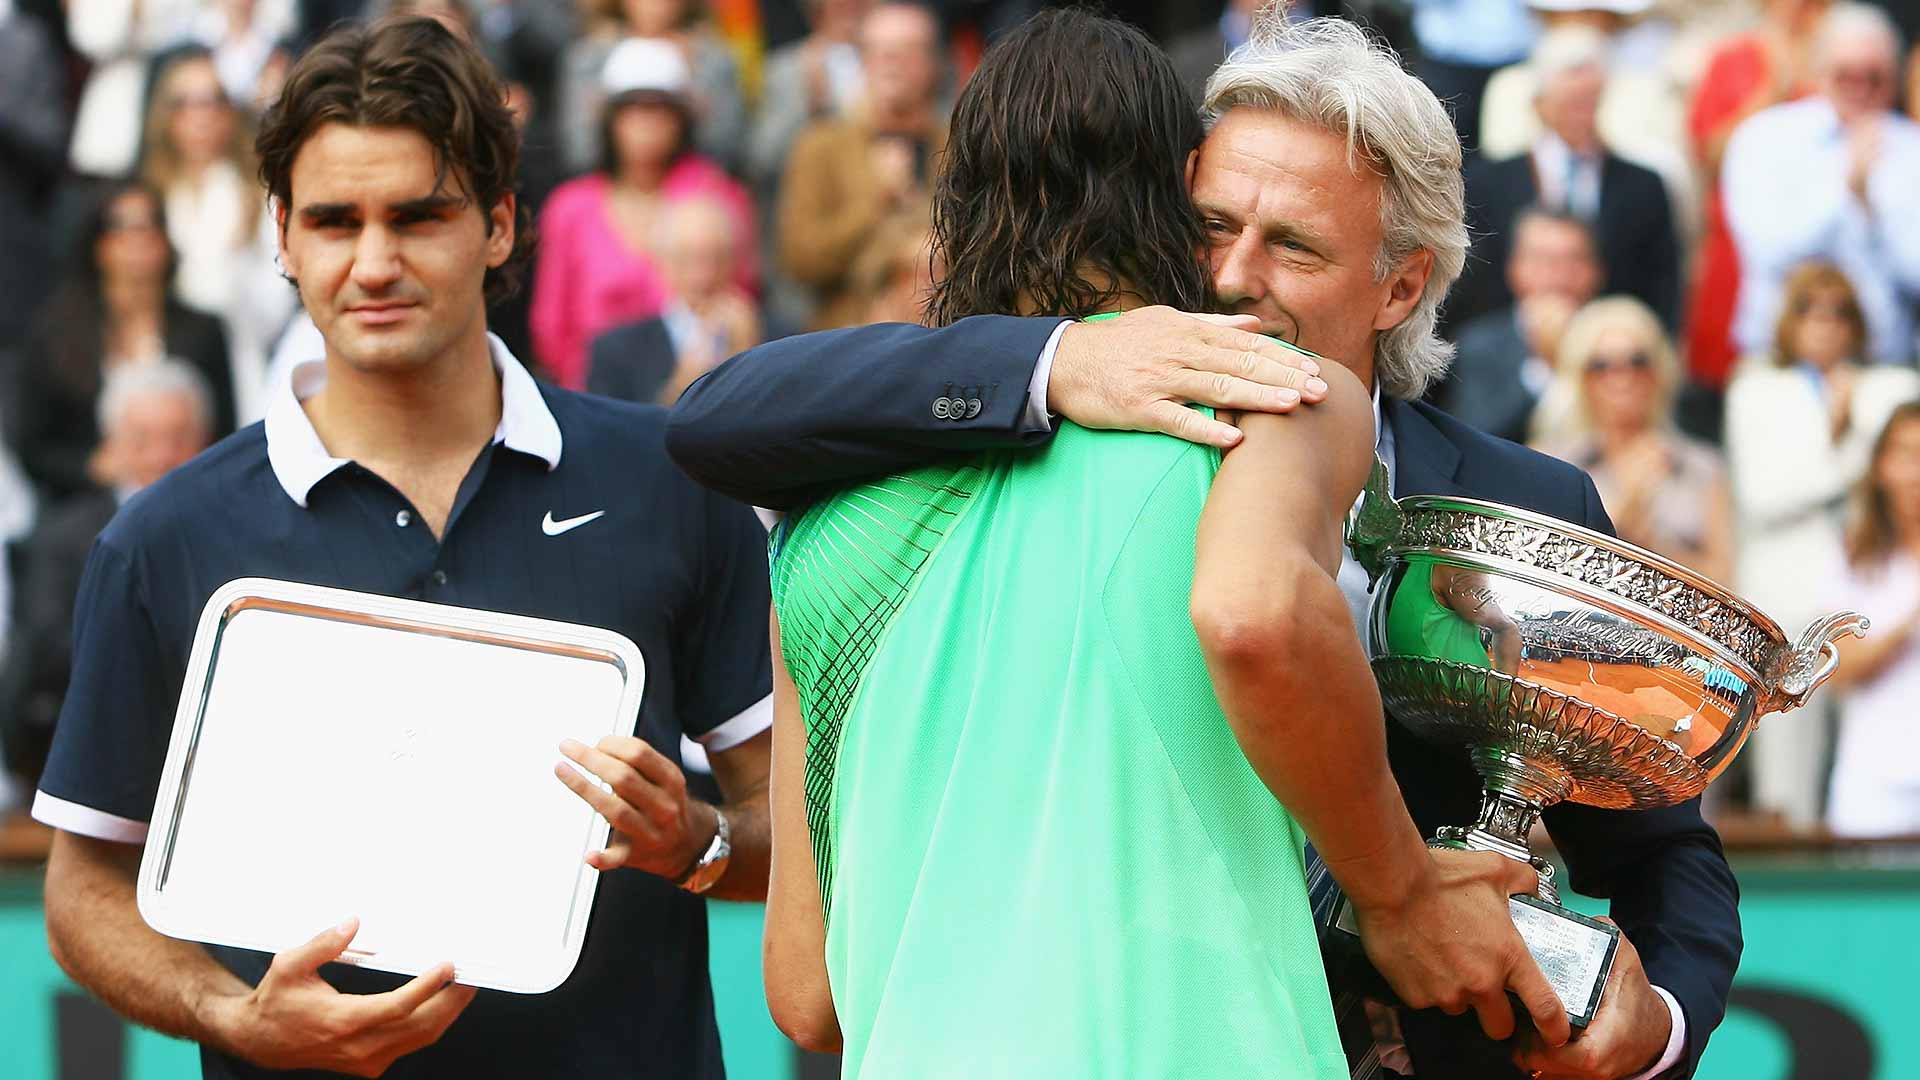 Nadal receives the French Open trophy from Bjorn Borg in 2008, his 4th title at Roland Garros